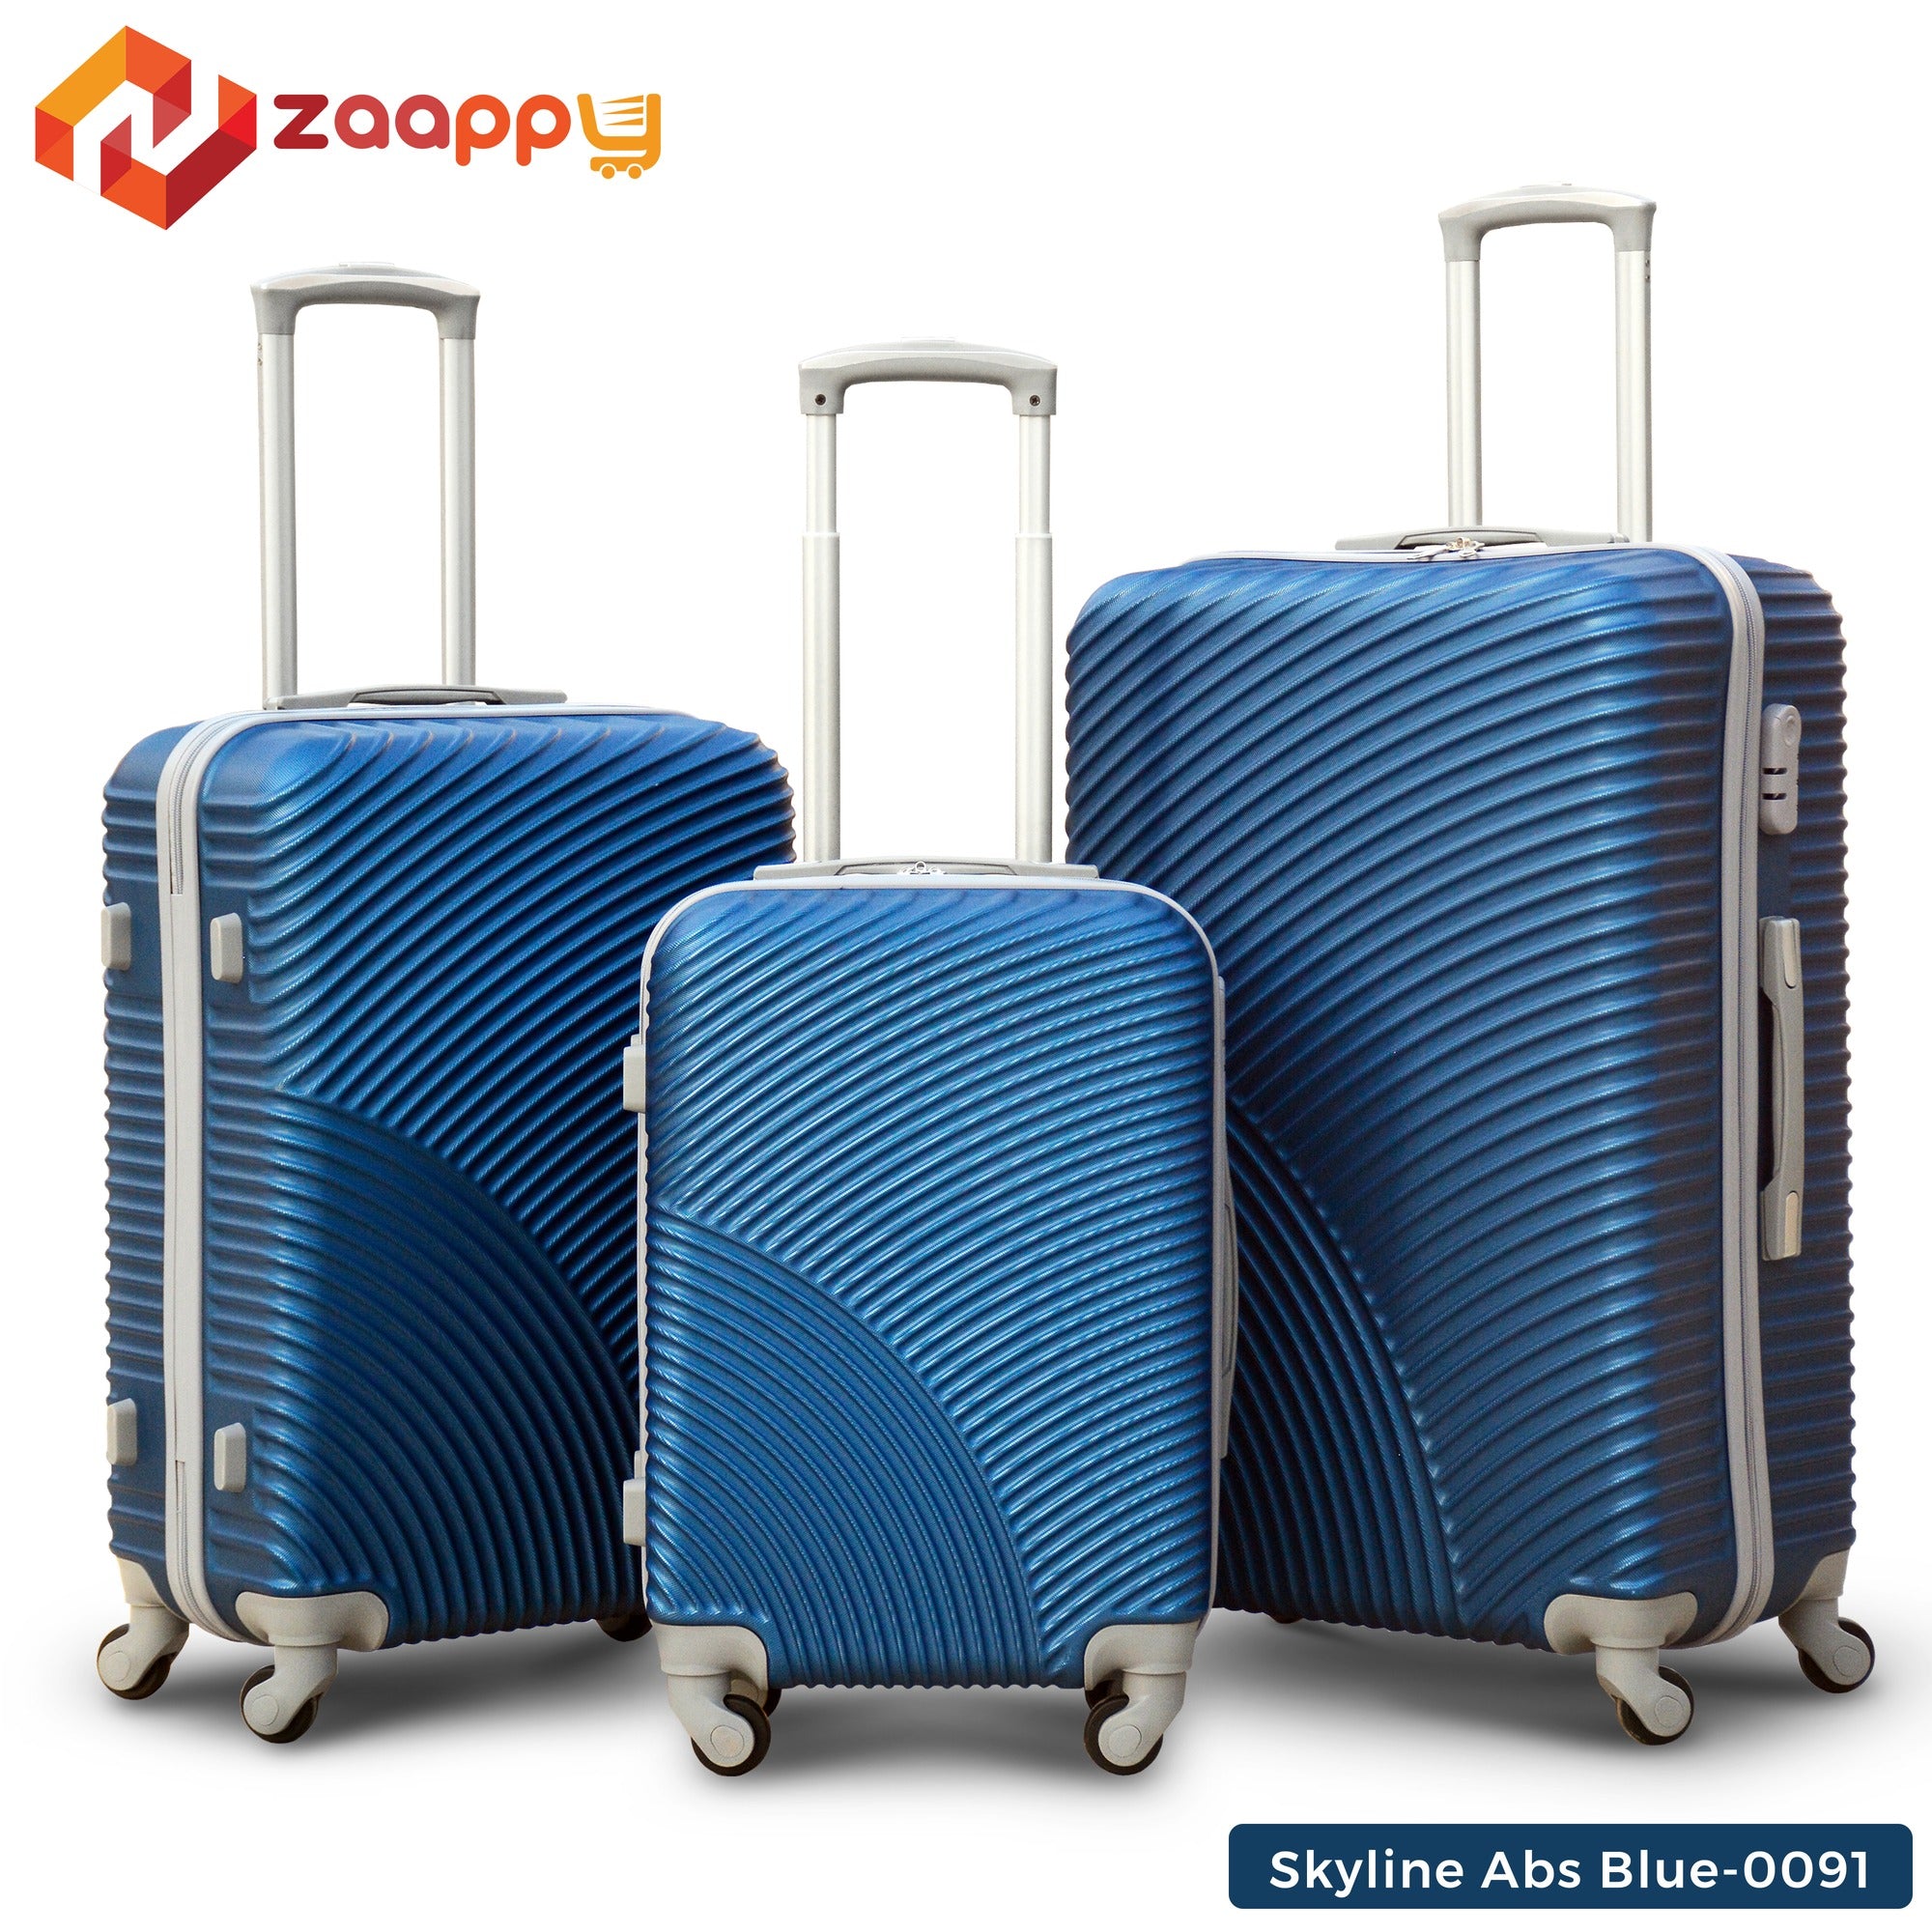 3 Pcs Set 20” 24” 28 Inches Skyline ABS Blue Lightweight ABS Luggage | Hard Case Trolley Bag | 2 Years Warranty - 0091